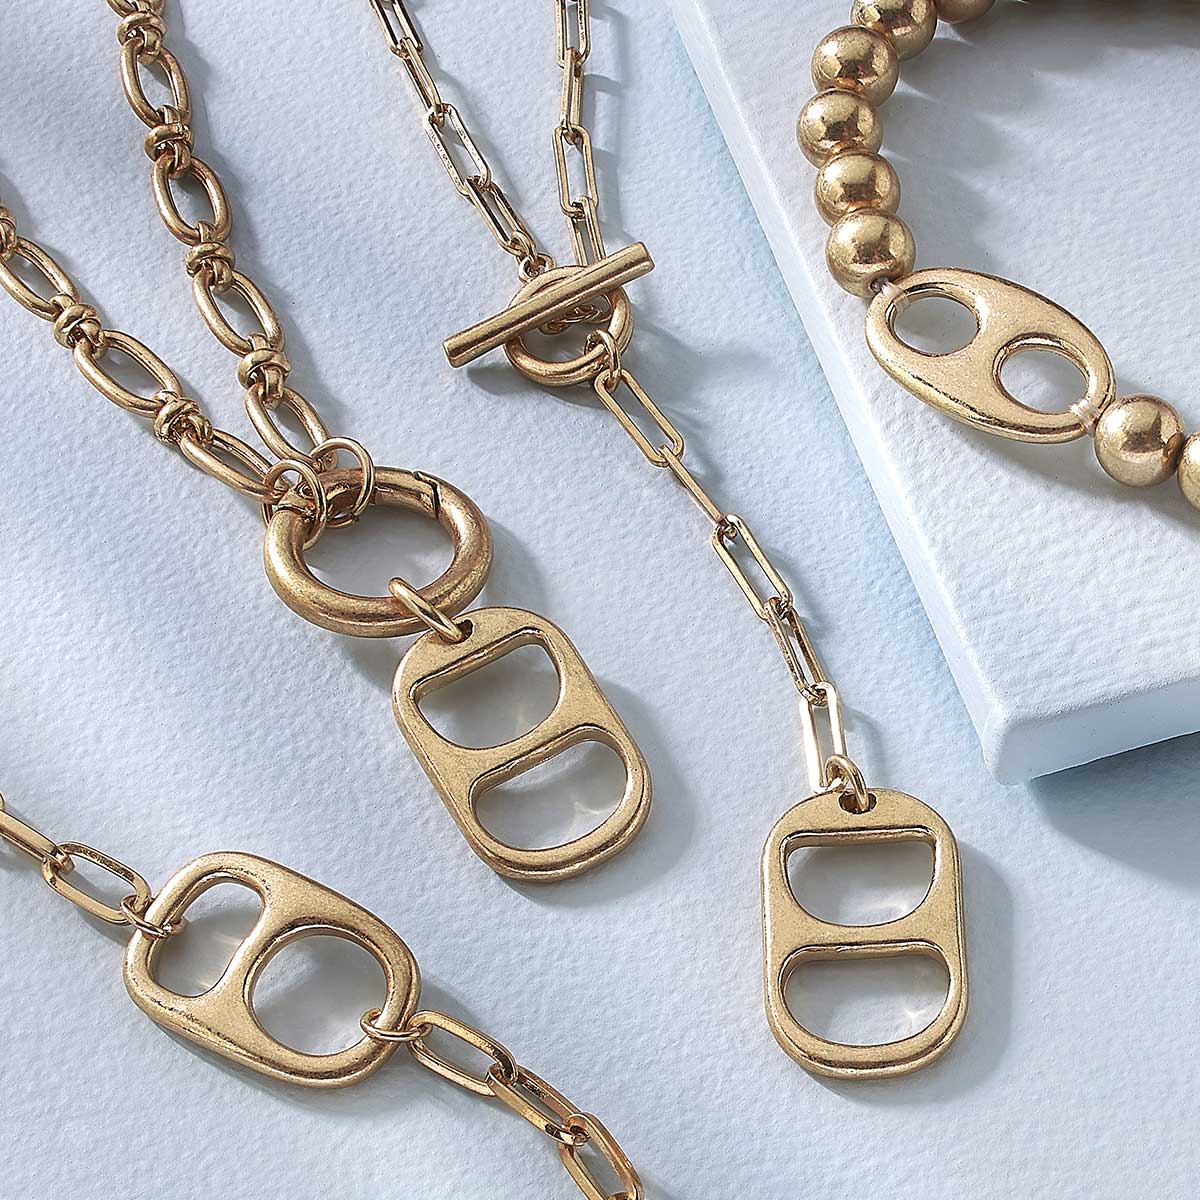 Soda Tab Chain Link Necklace in Worn Gold